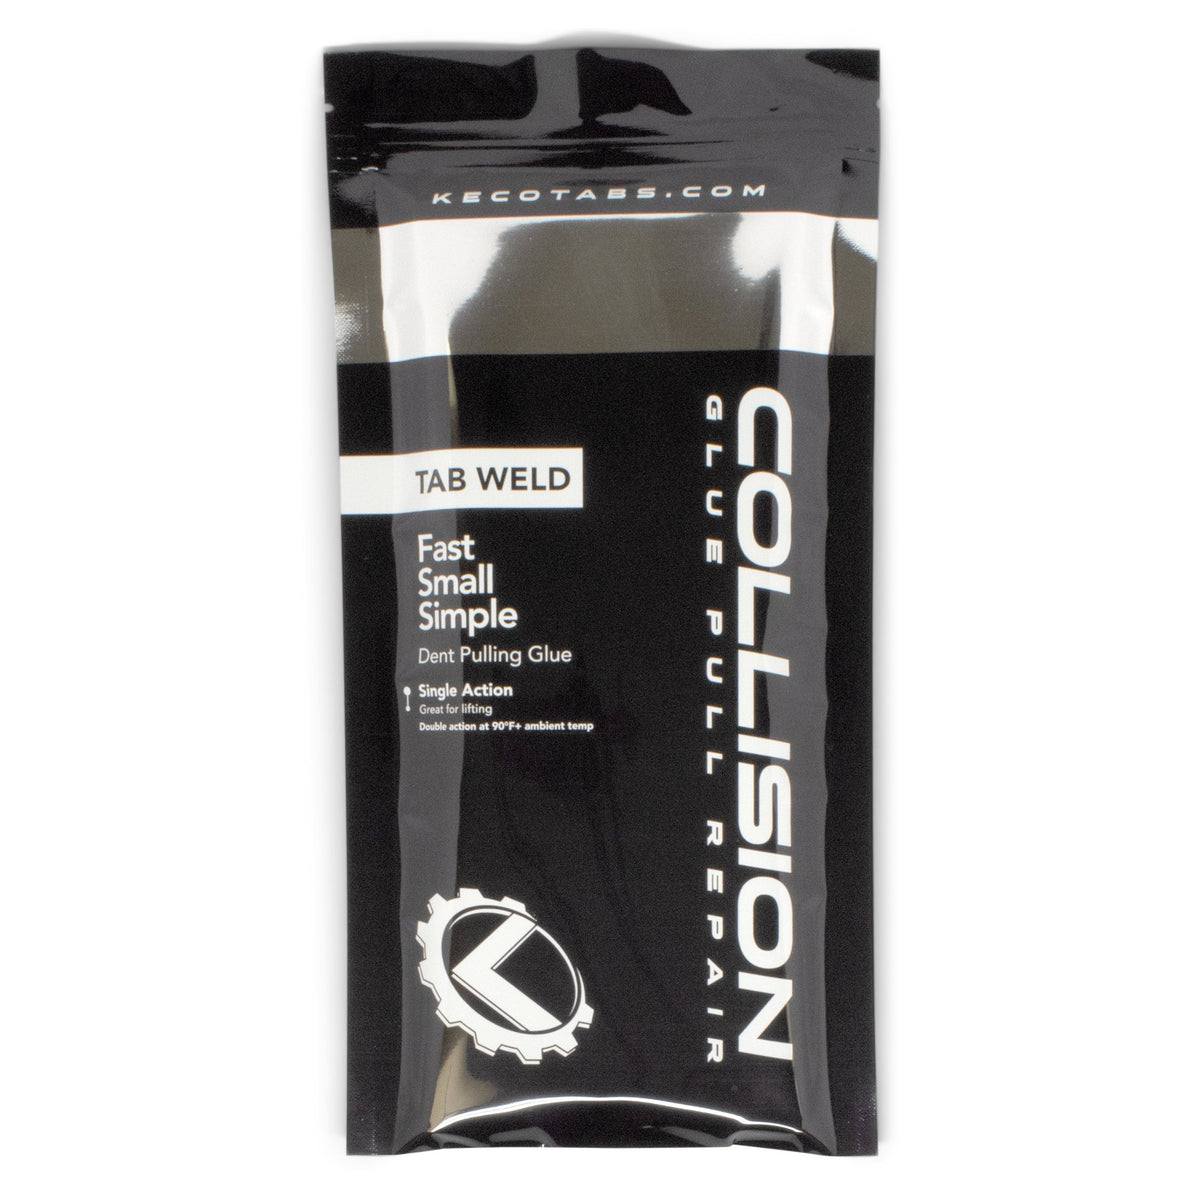 Tequila COLLISION PDR Glue Super STRONG, more working time